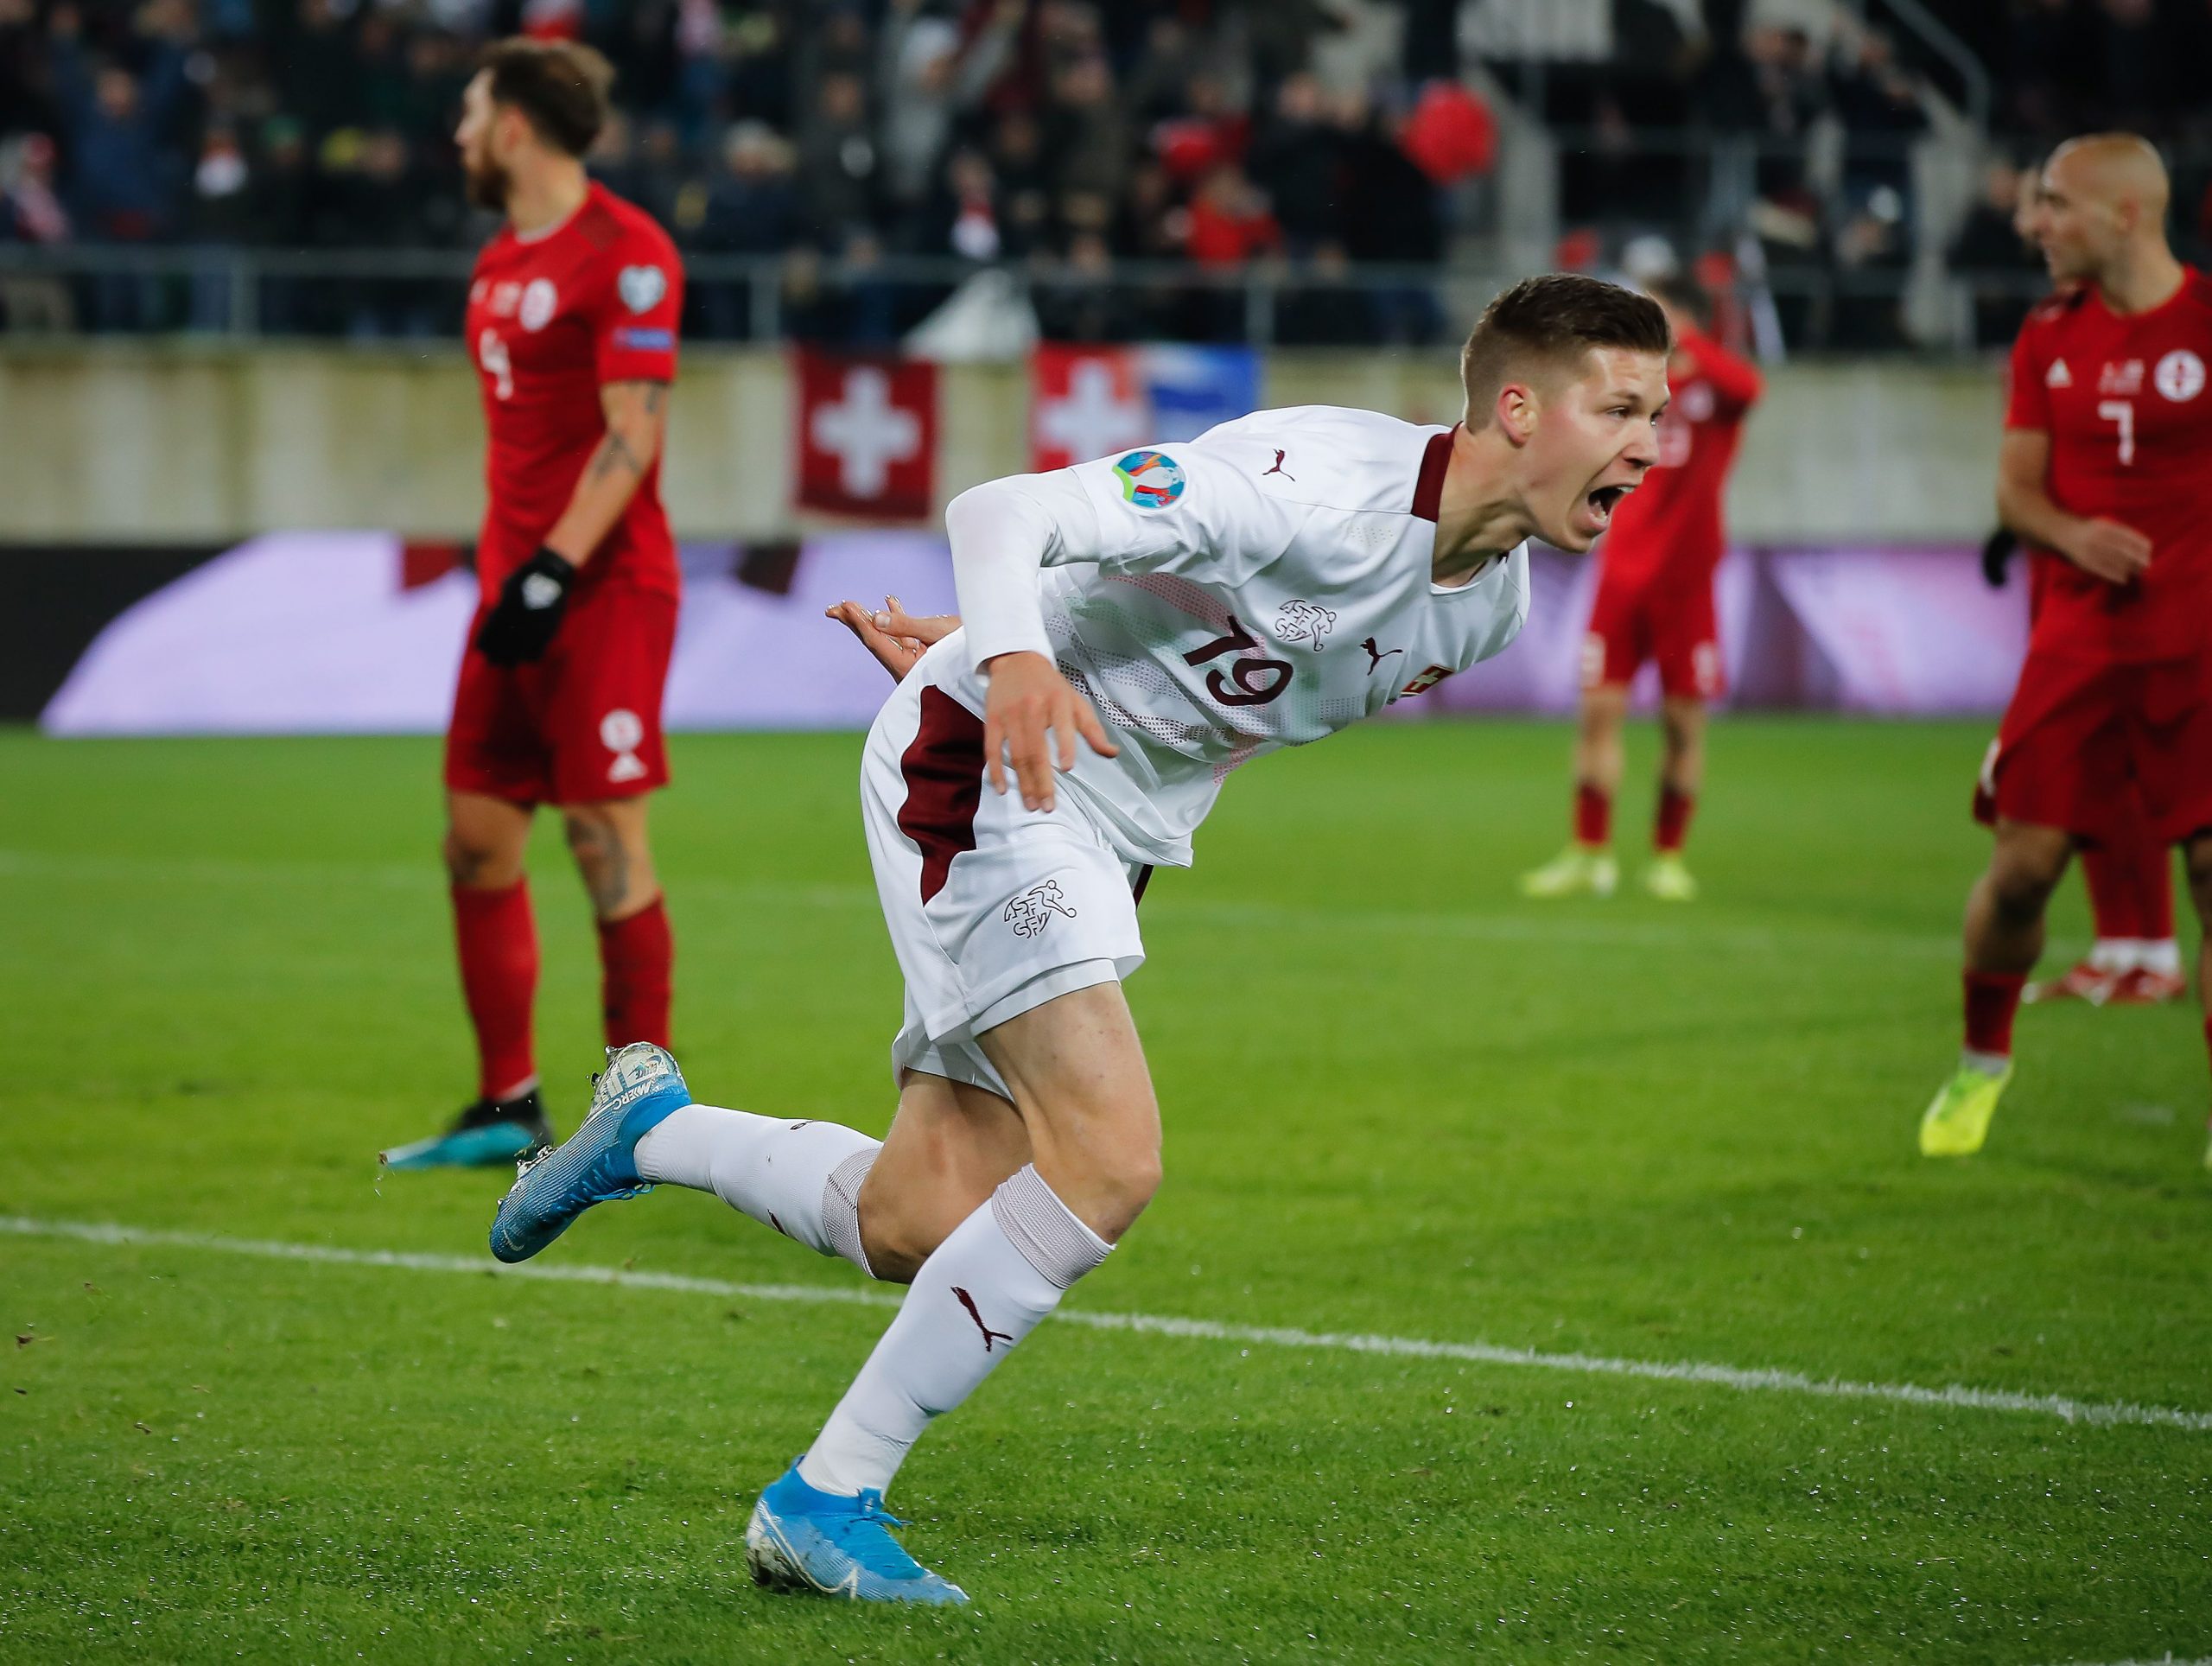 Cedric Itten enjoyed a brilliant 2019/20 campaign with St. Gallen (Getty Images)